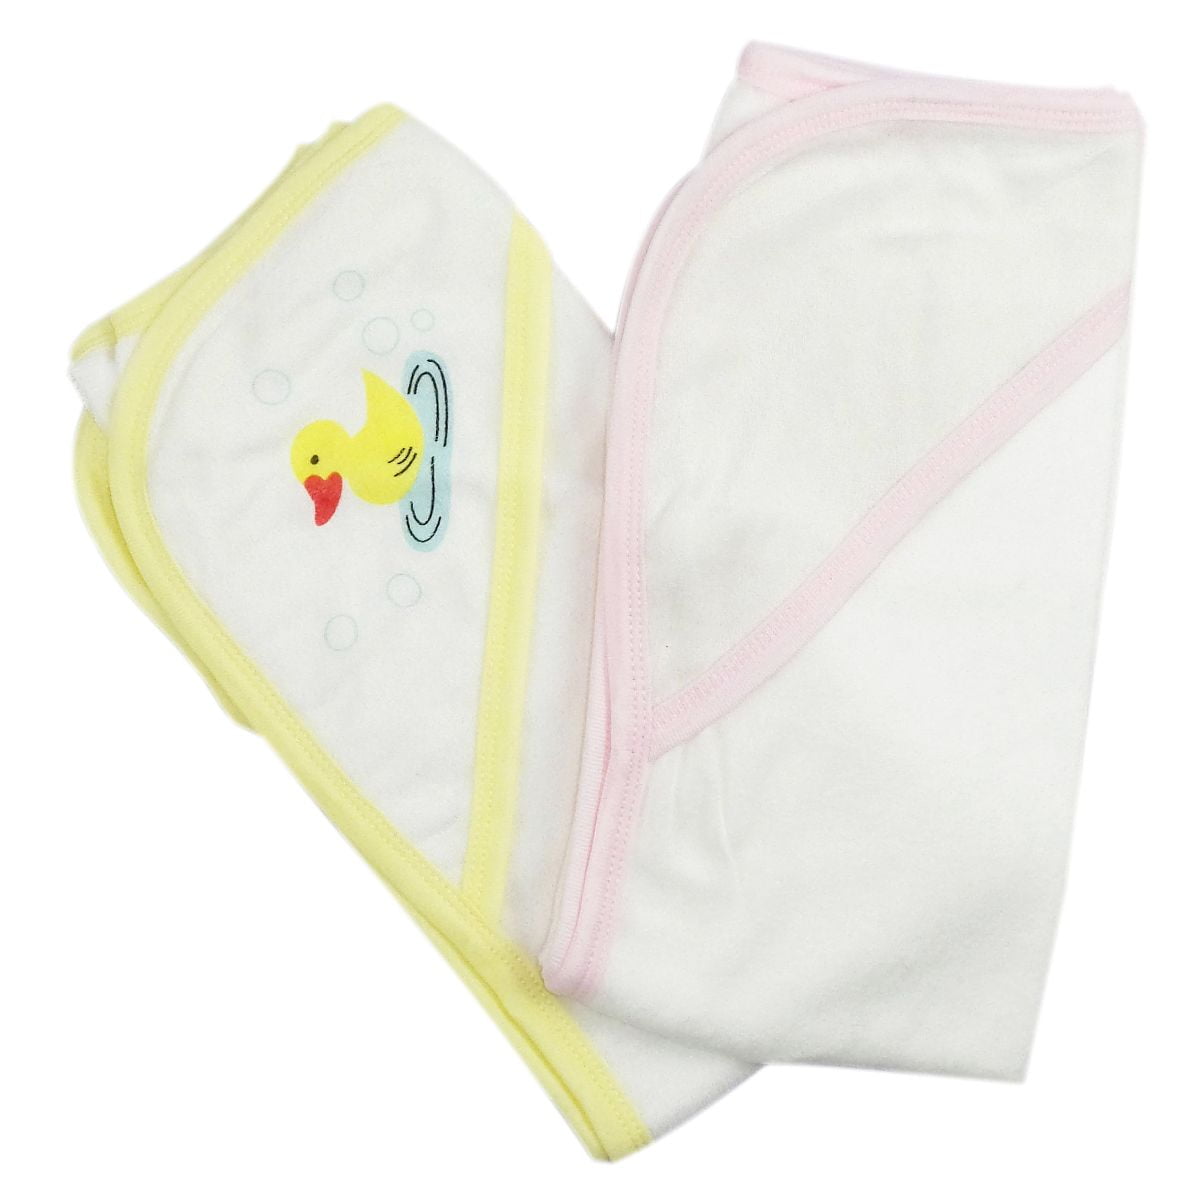 021-yellow-021b-pink Infant Hooded Bath Towel, Pink & White - Pack Of 2